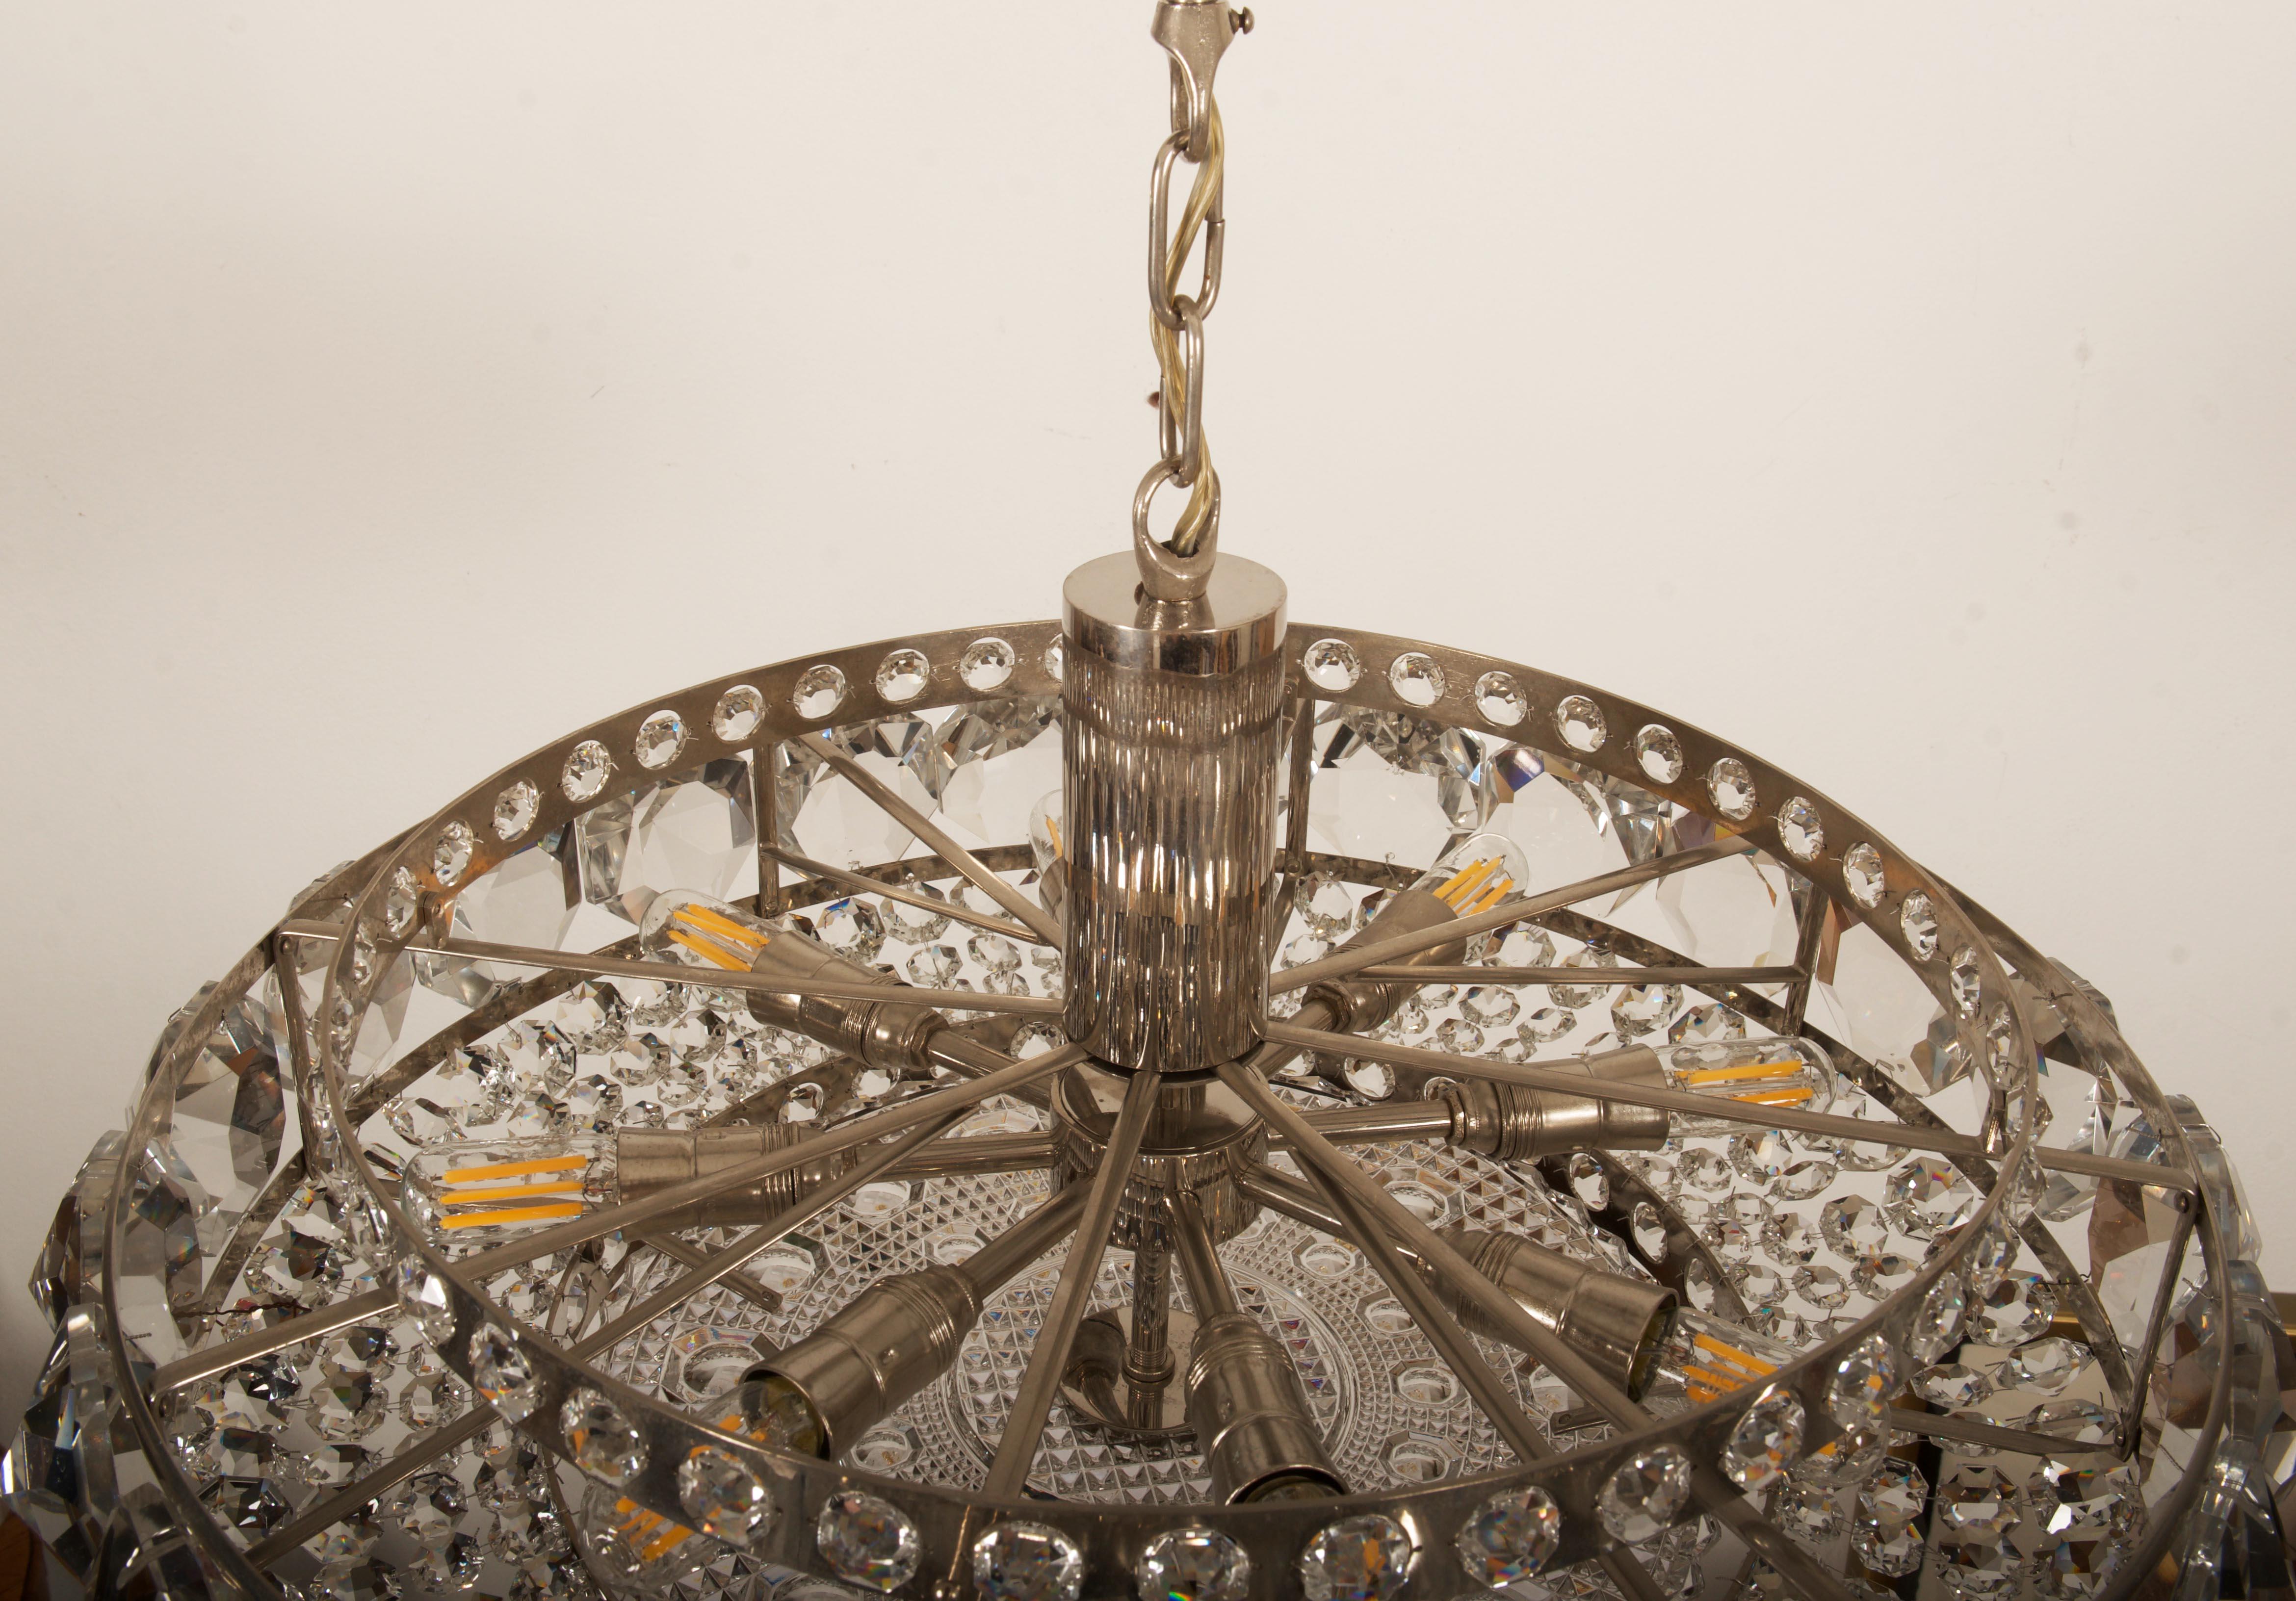 Scandinavian Modern Chromed Brass and Glass Chandelier by Orrefors from the 1960s For Sale